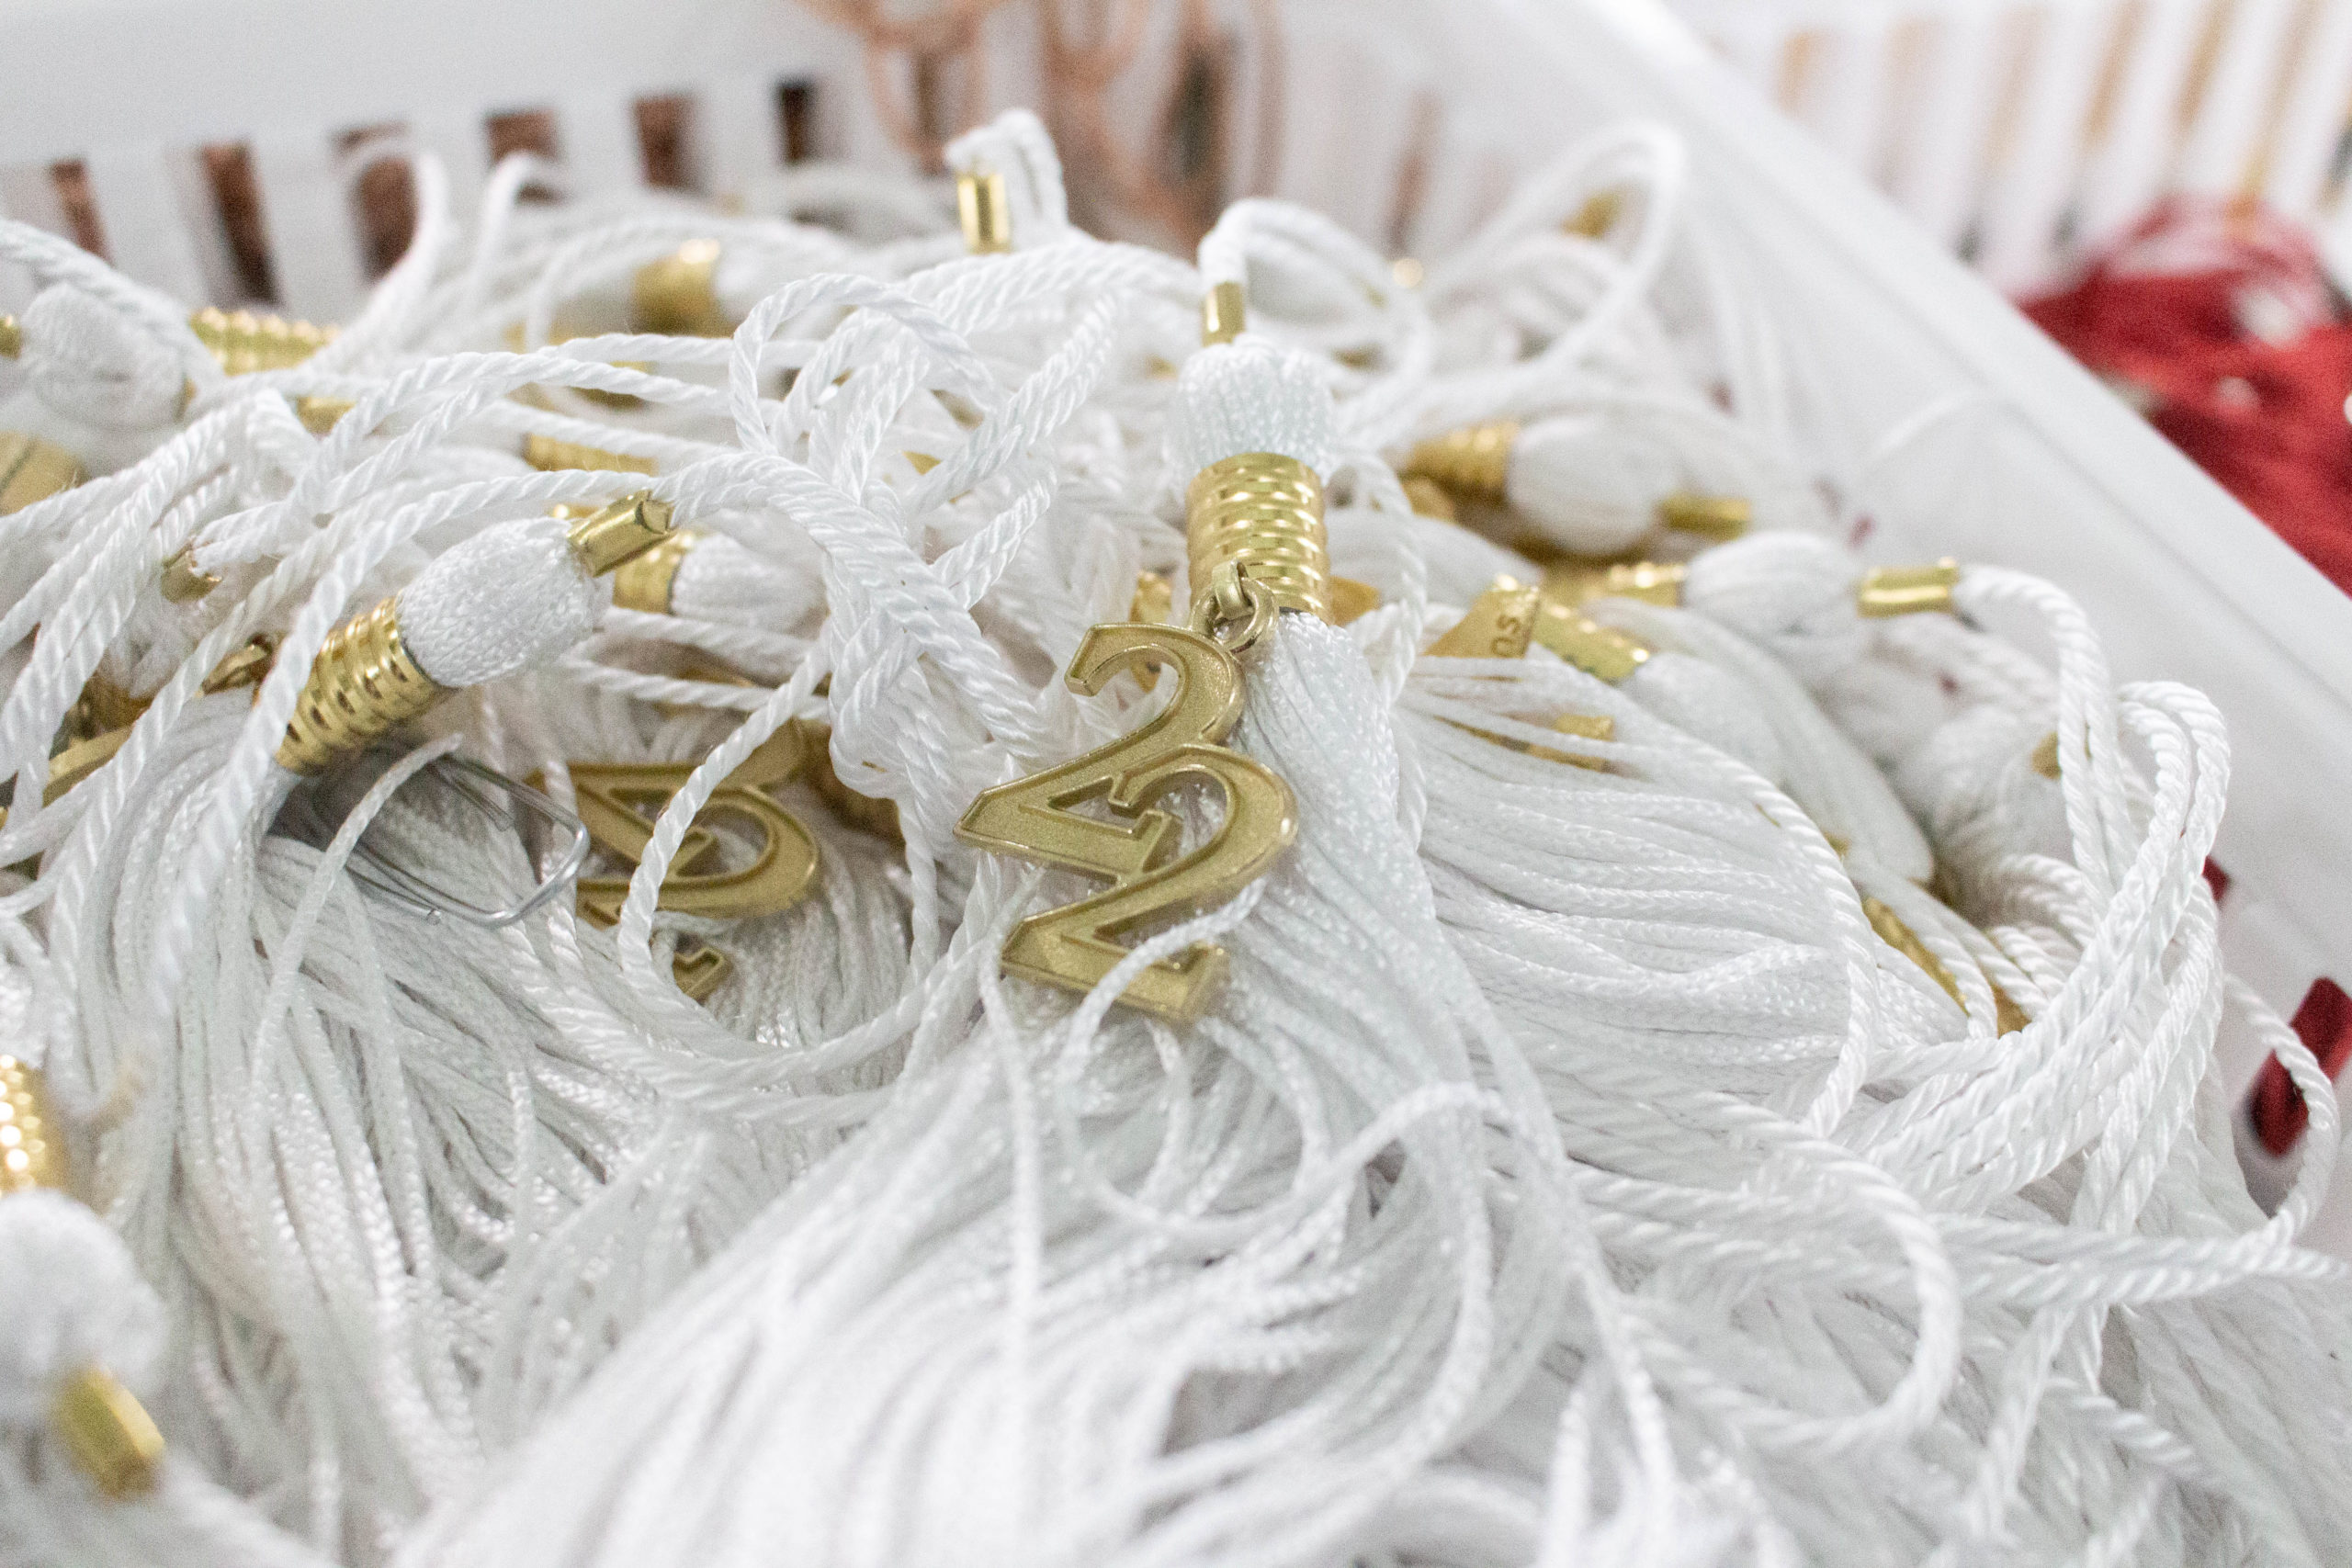 White tassels grouped together for graduation. Photo taken in December 2022.